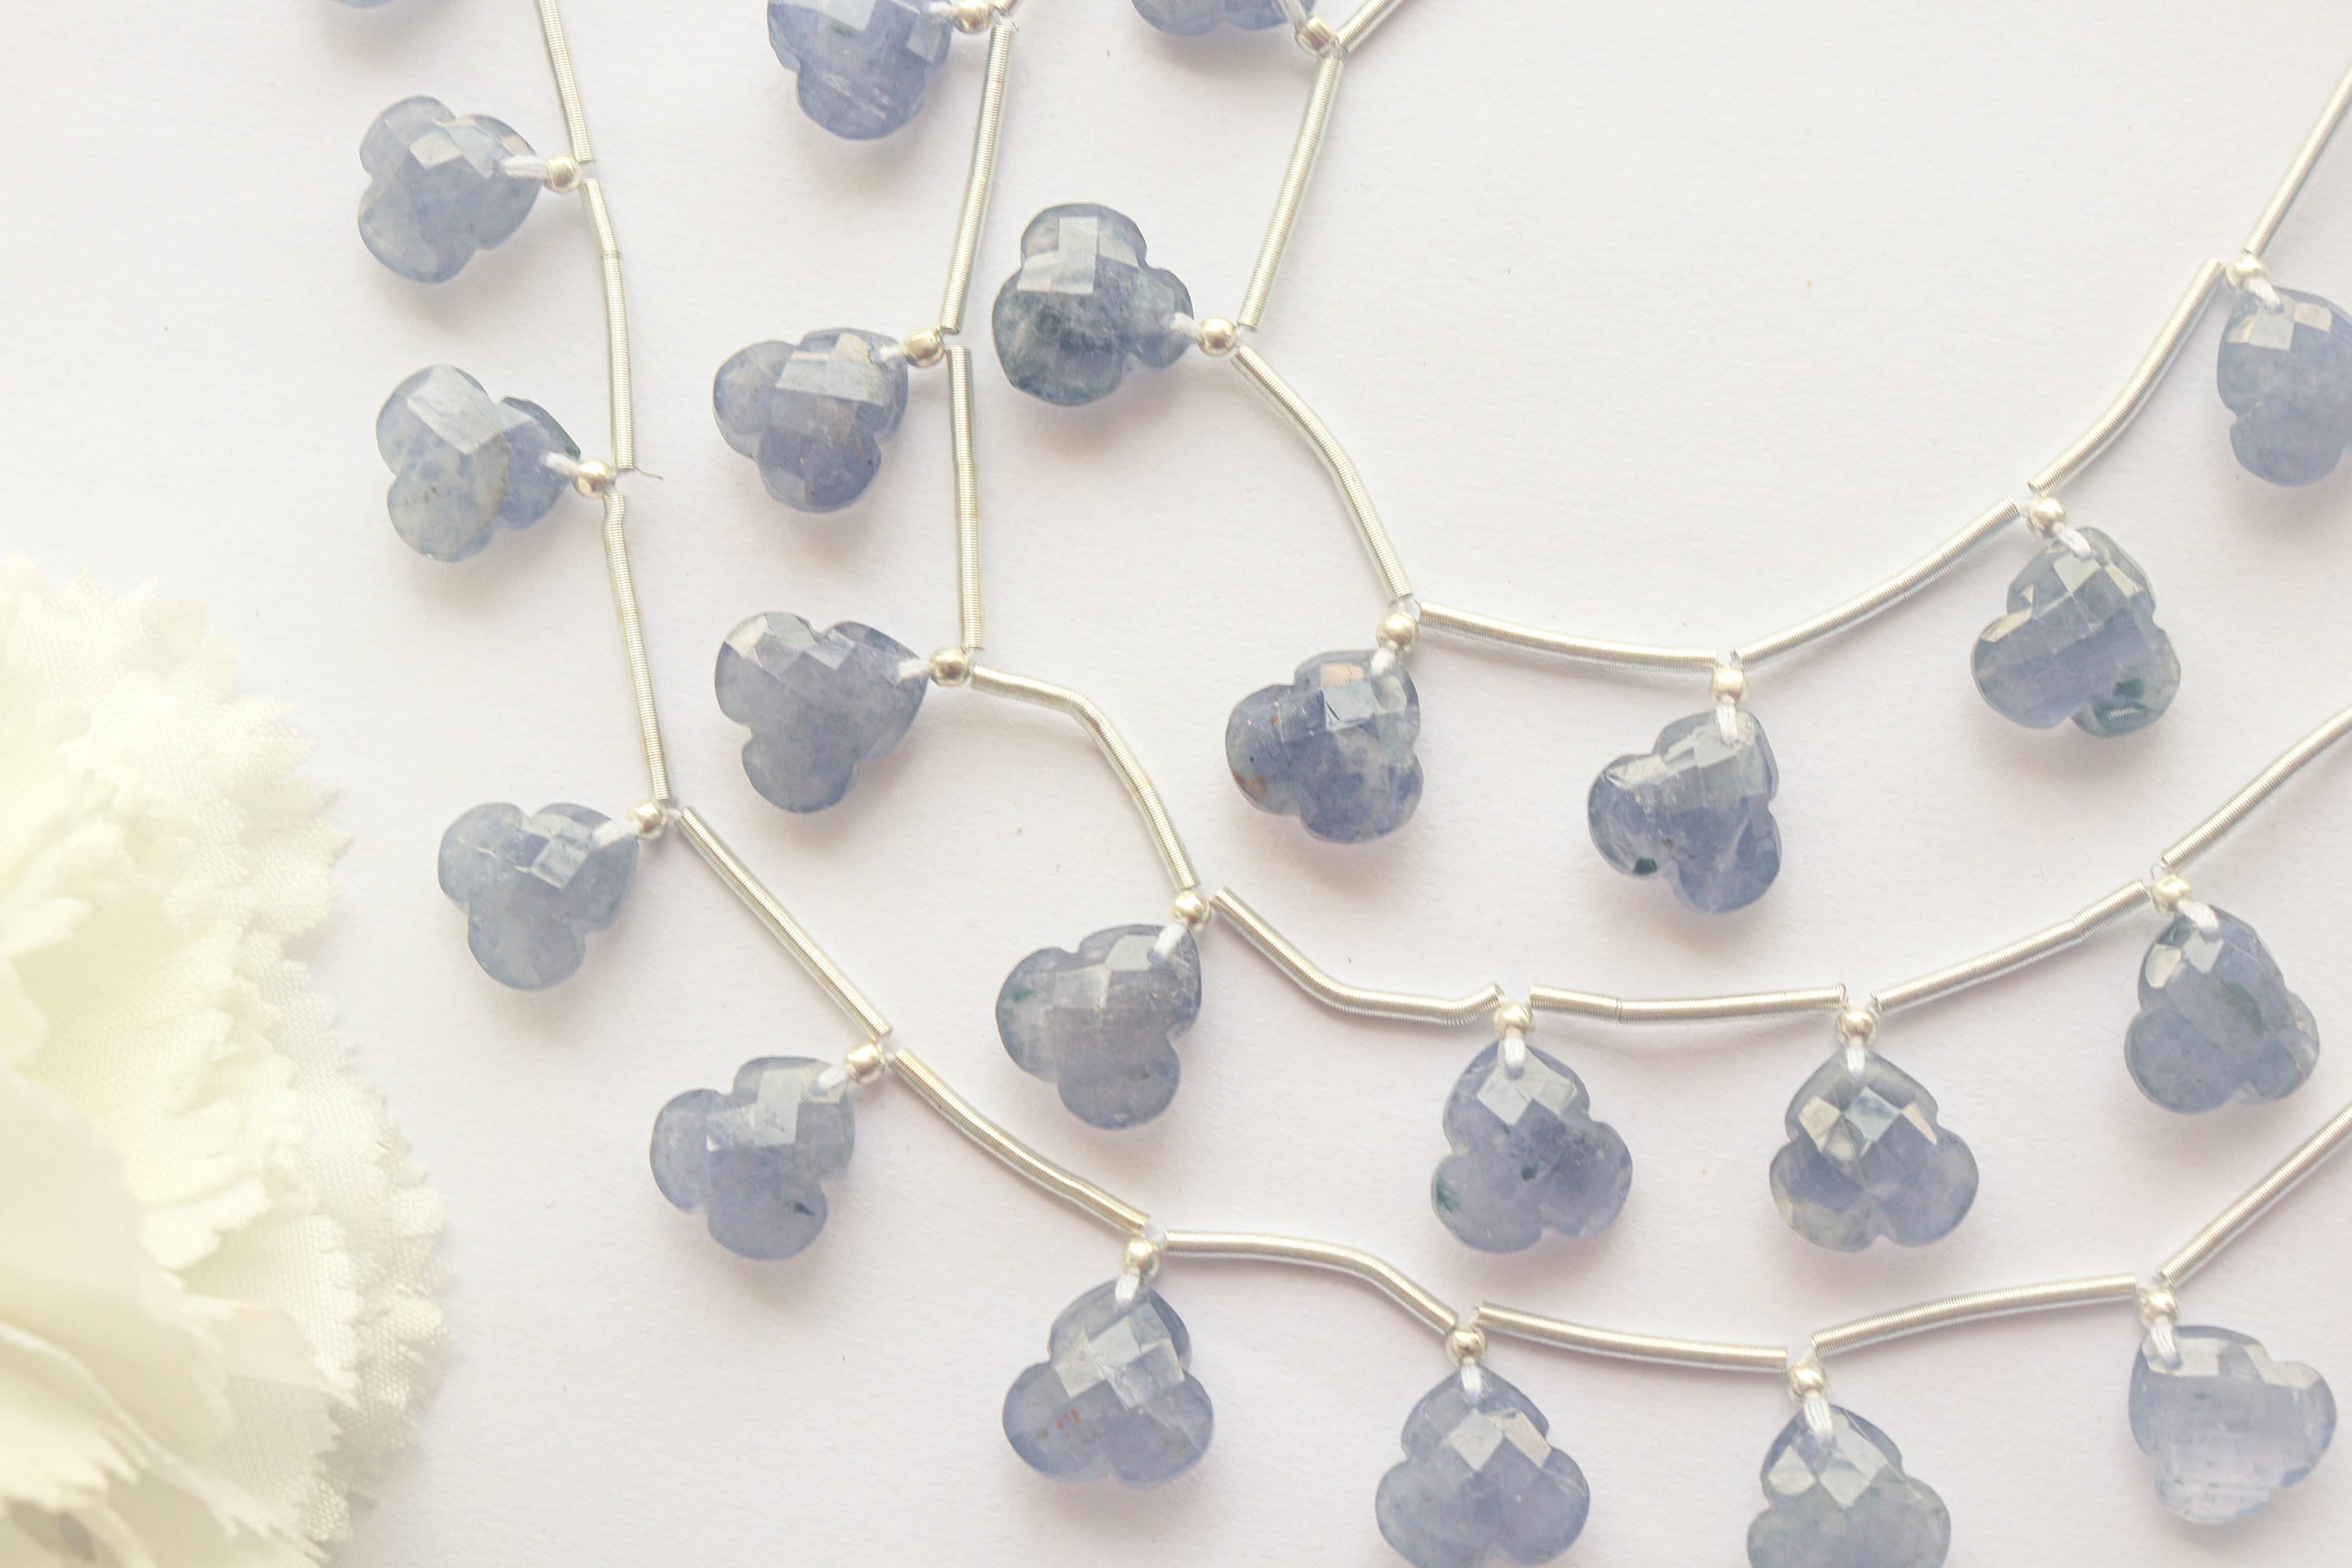 Iolite Flower shape Faceted Beads | 8 Inch String | Natural Gemstone | 10 Pieces | 11x11mm | Beadsforyourjewelry Beadsforyourjewelry